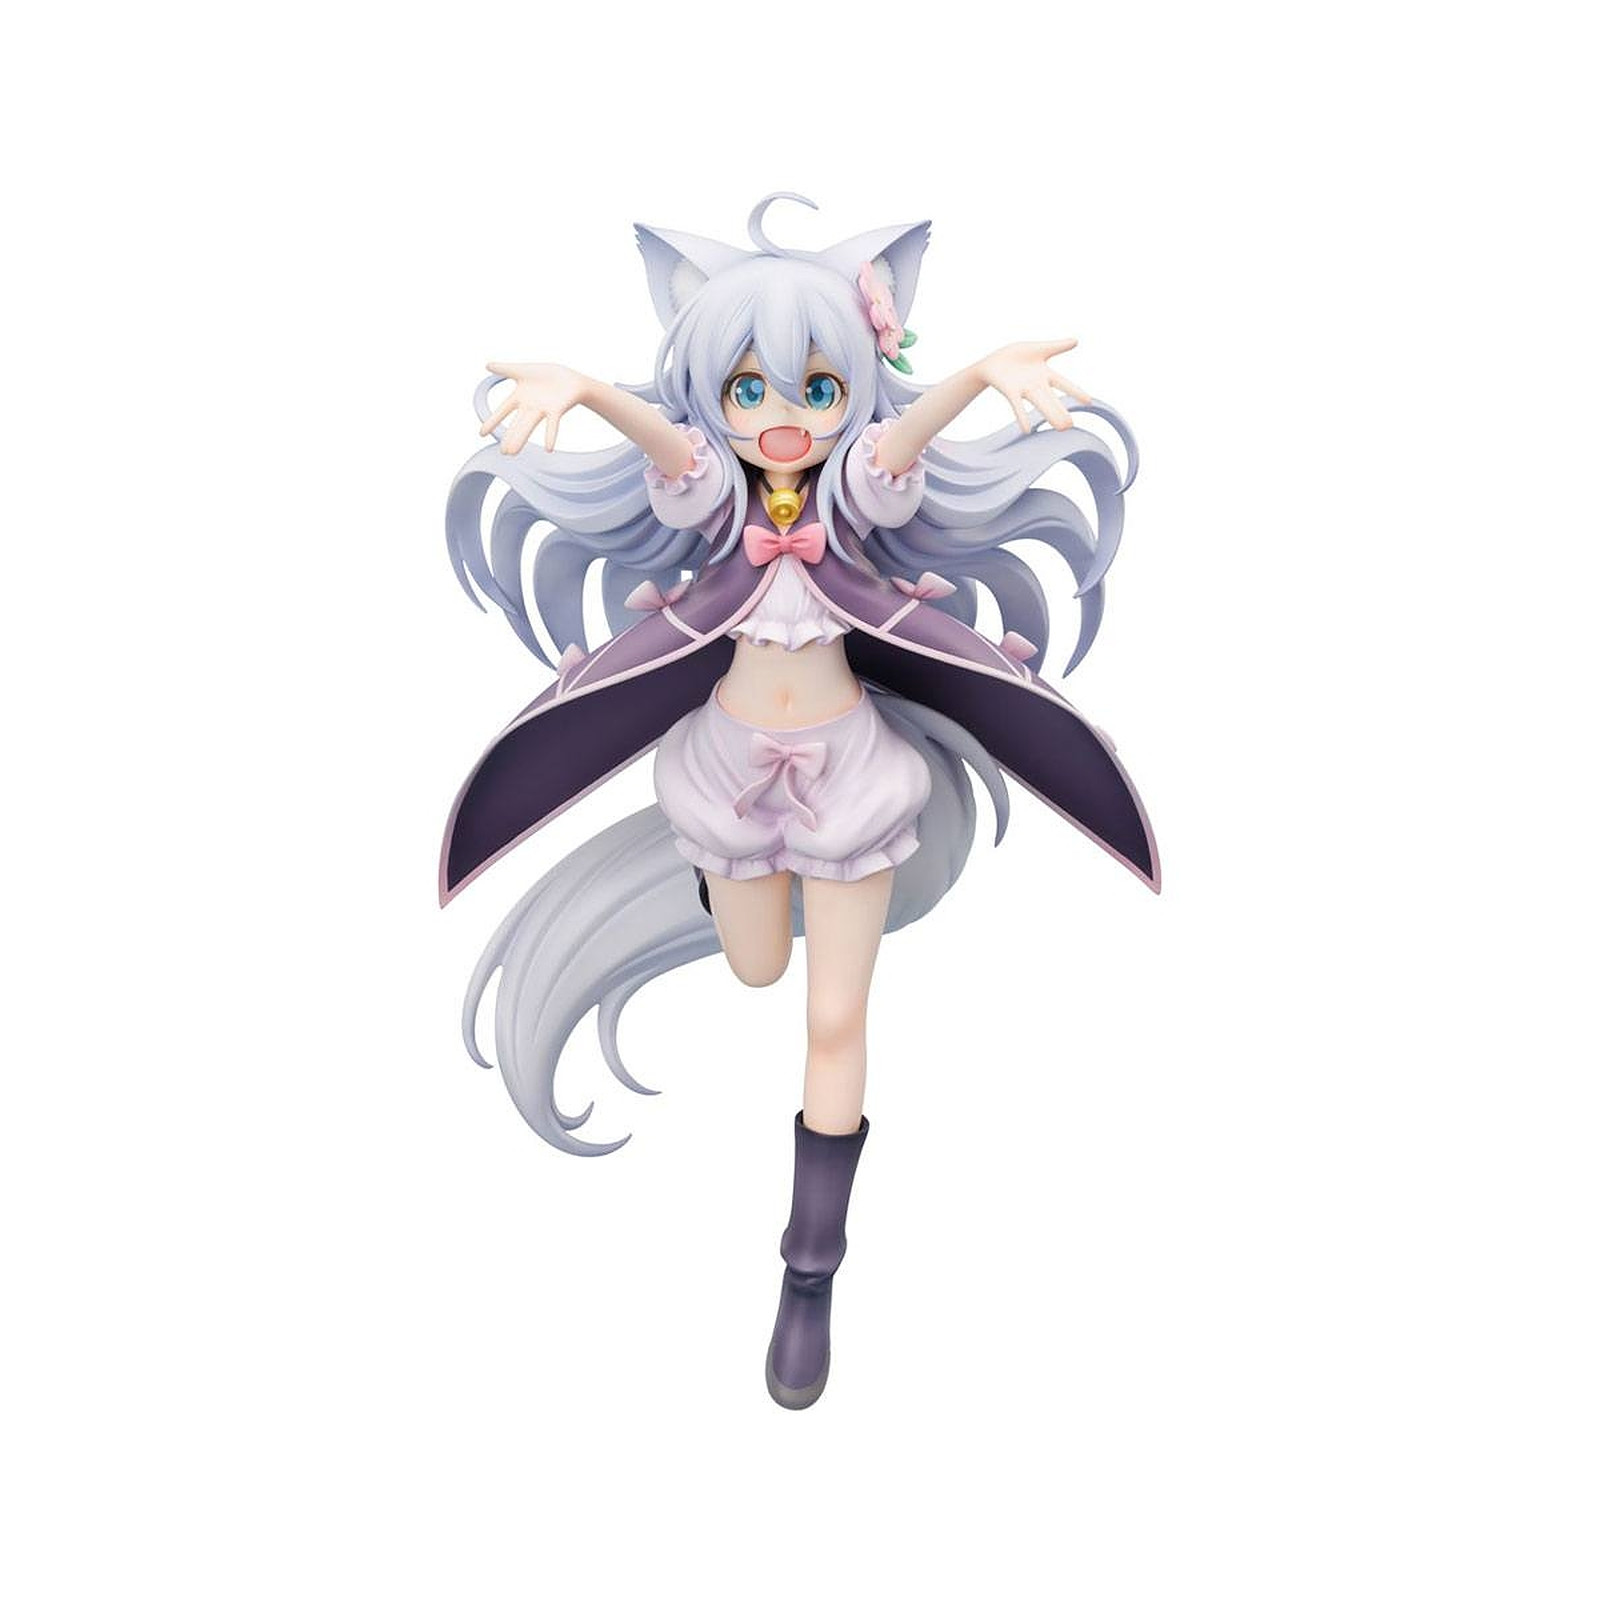 Drugstore in Another World - Statuette 1/7 Noela 21 cm - Figurines Furyu